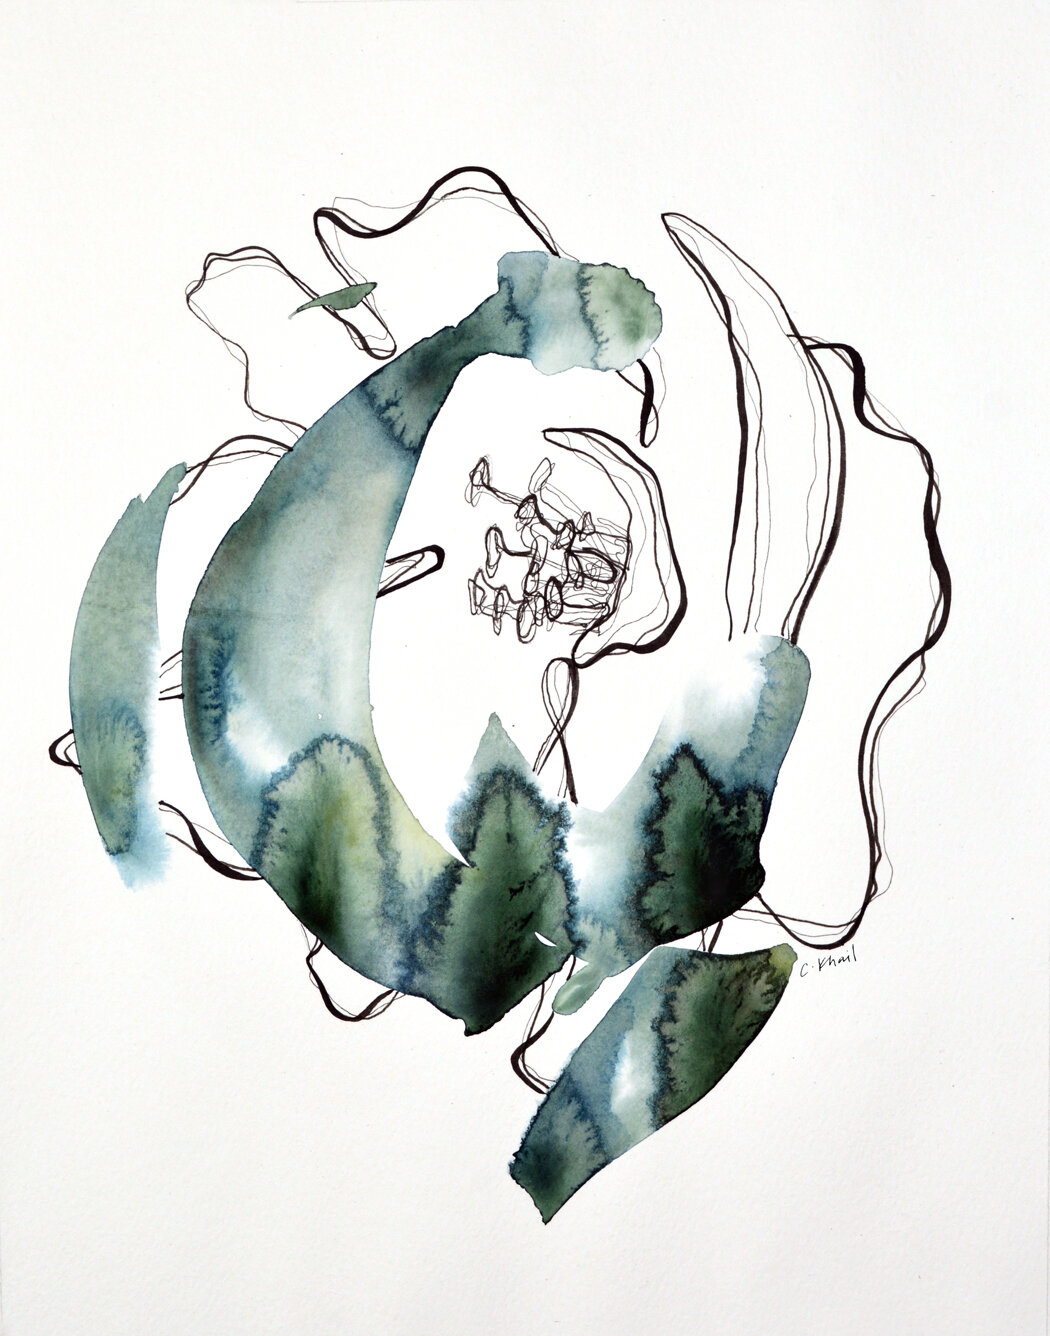 BAPTISM watercolor series by artist Courtney Khail